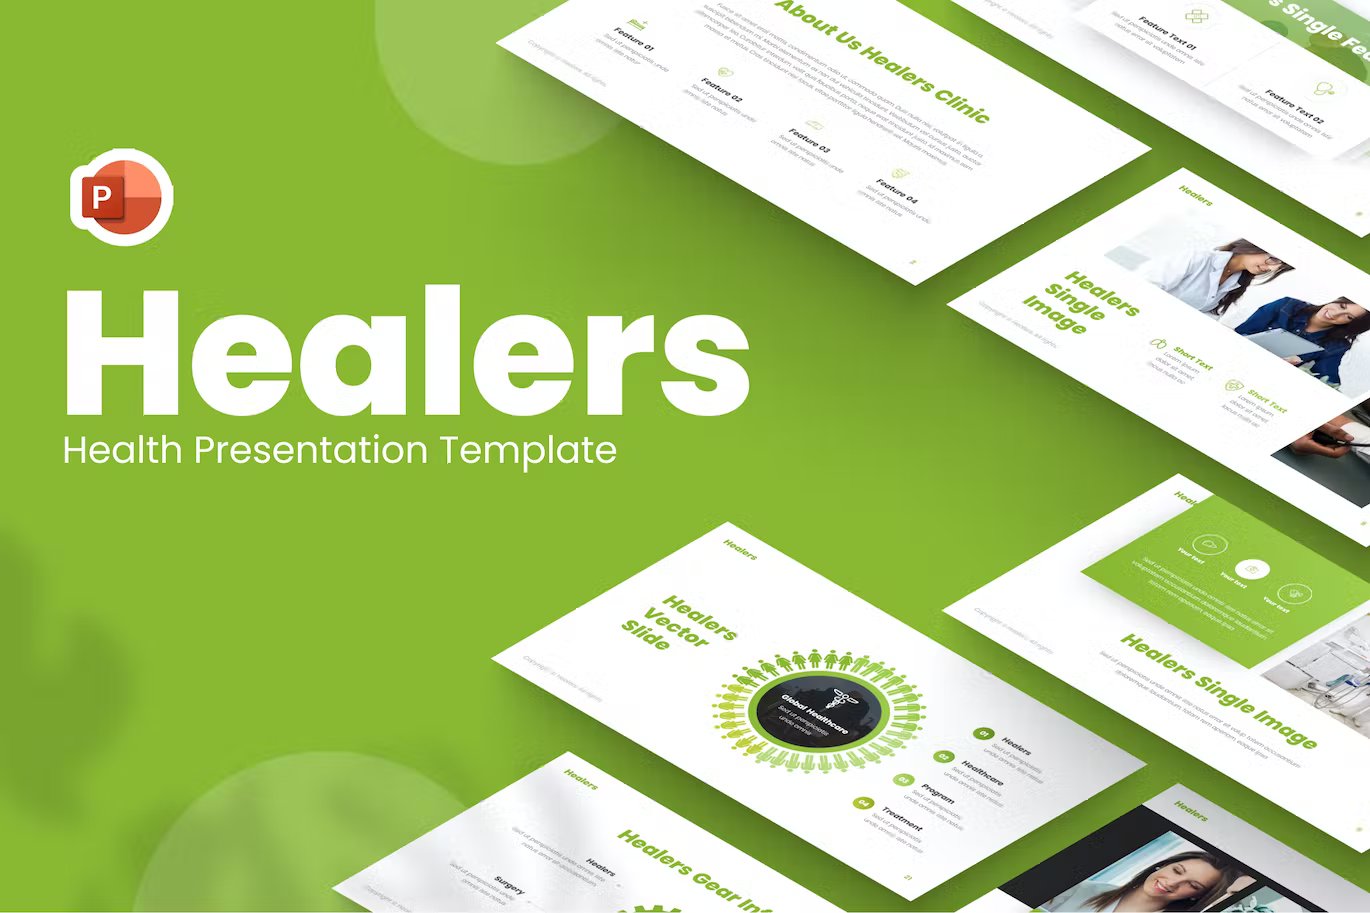 White lettering "Healers Health Presentation Template" and different presentation templates on a green background.